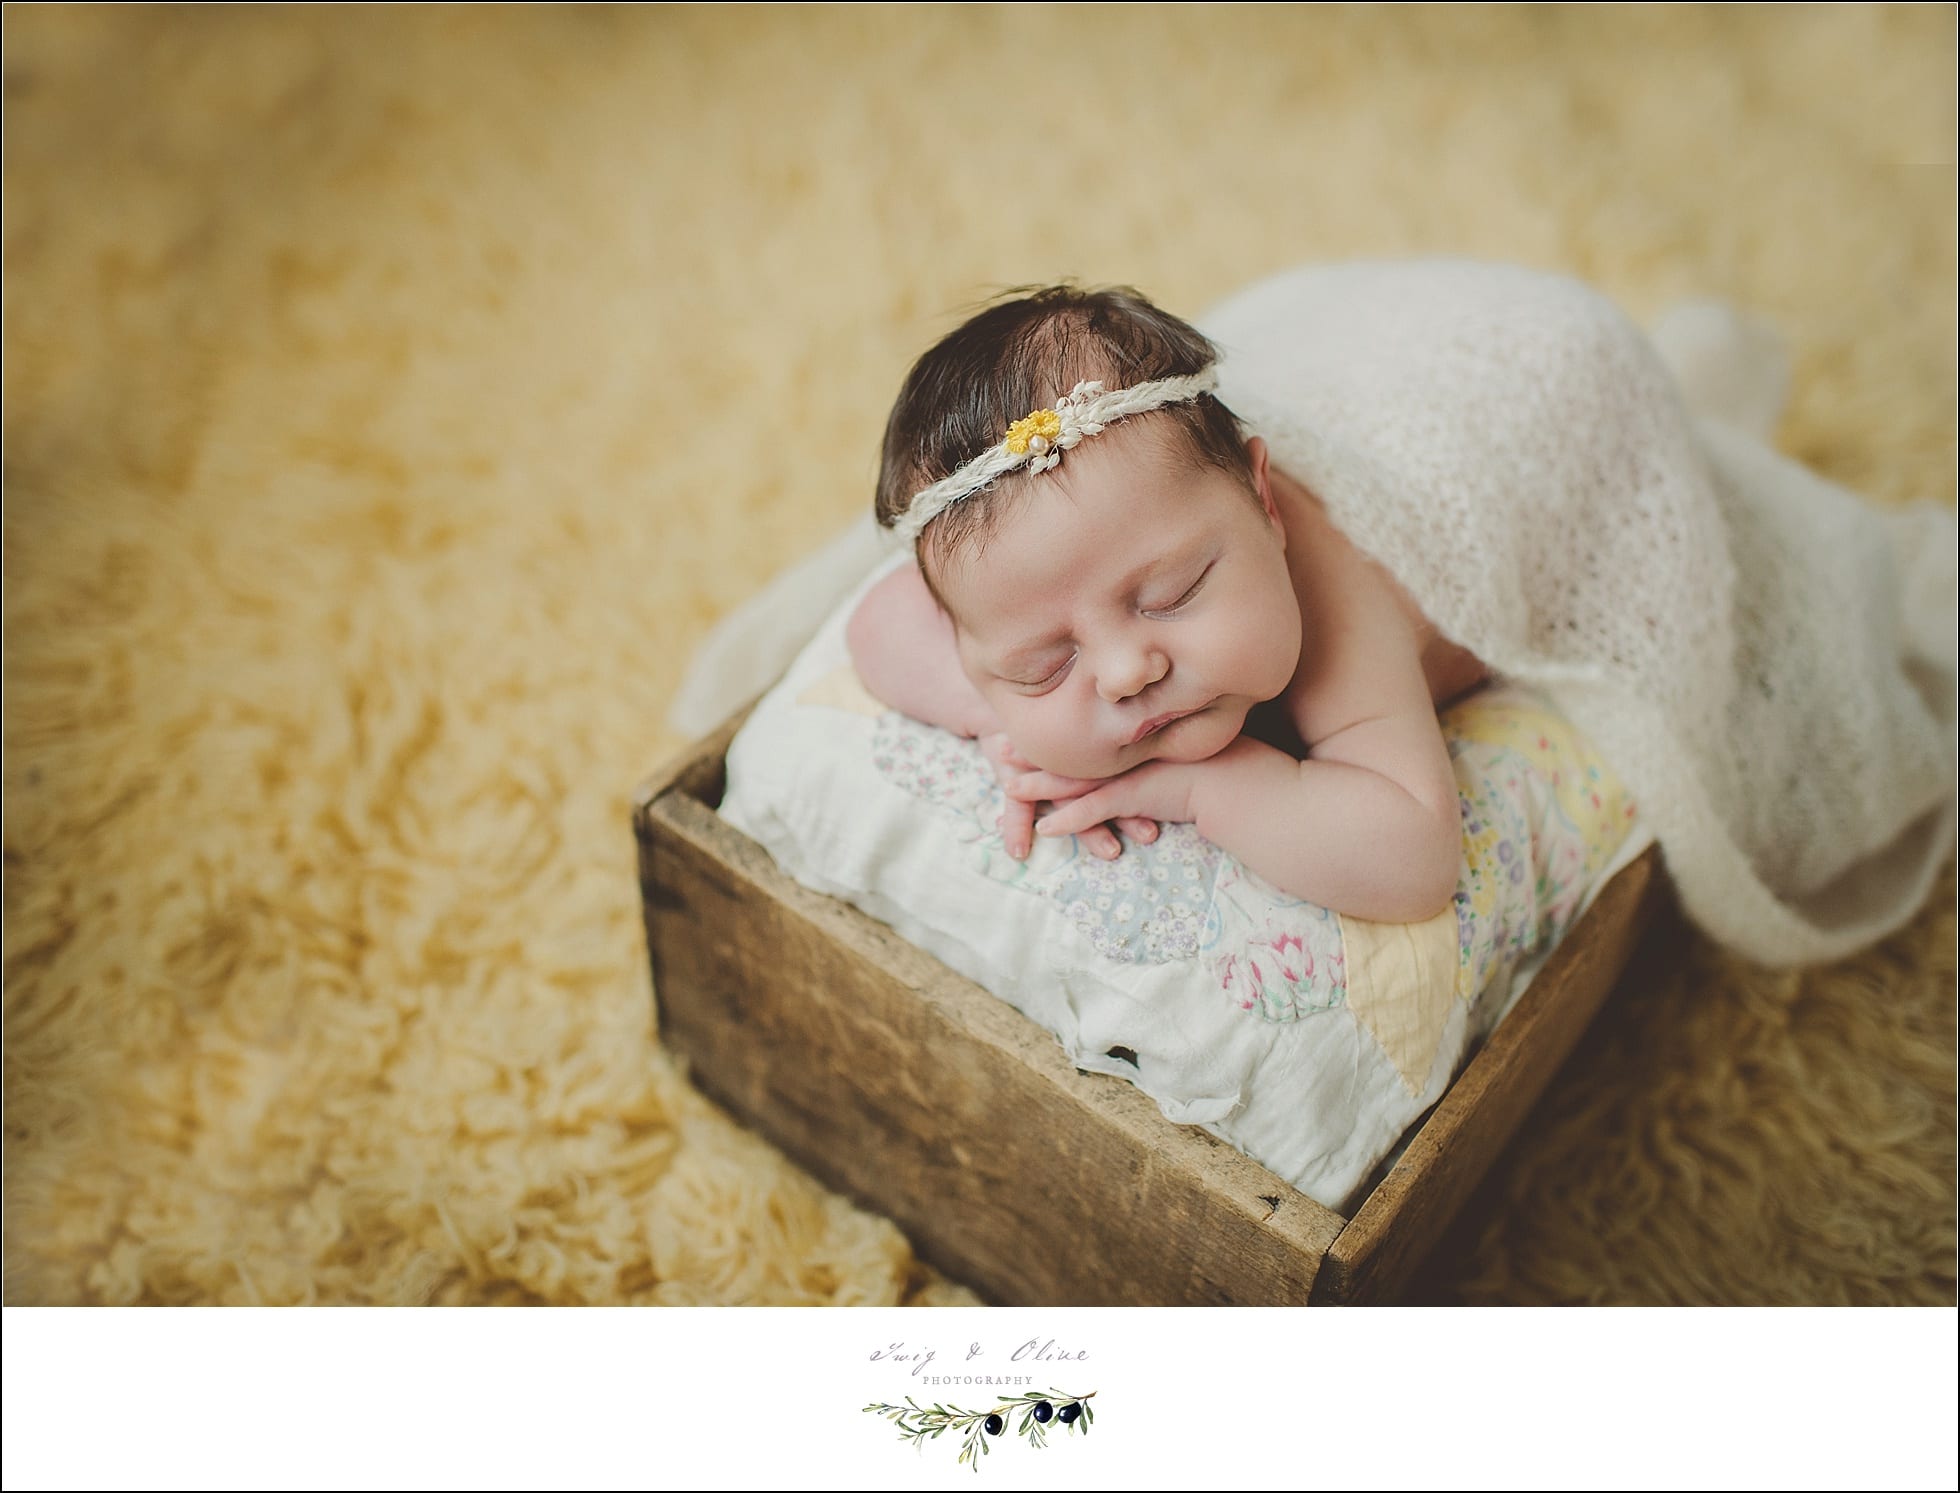 hair flowers, buckets, blankets, swaddled, cherubs, miracles, life, love, happy babies, Twig and Olive photography newborns